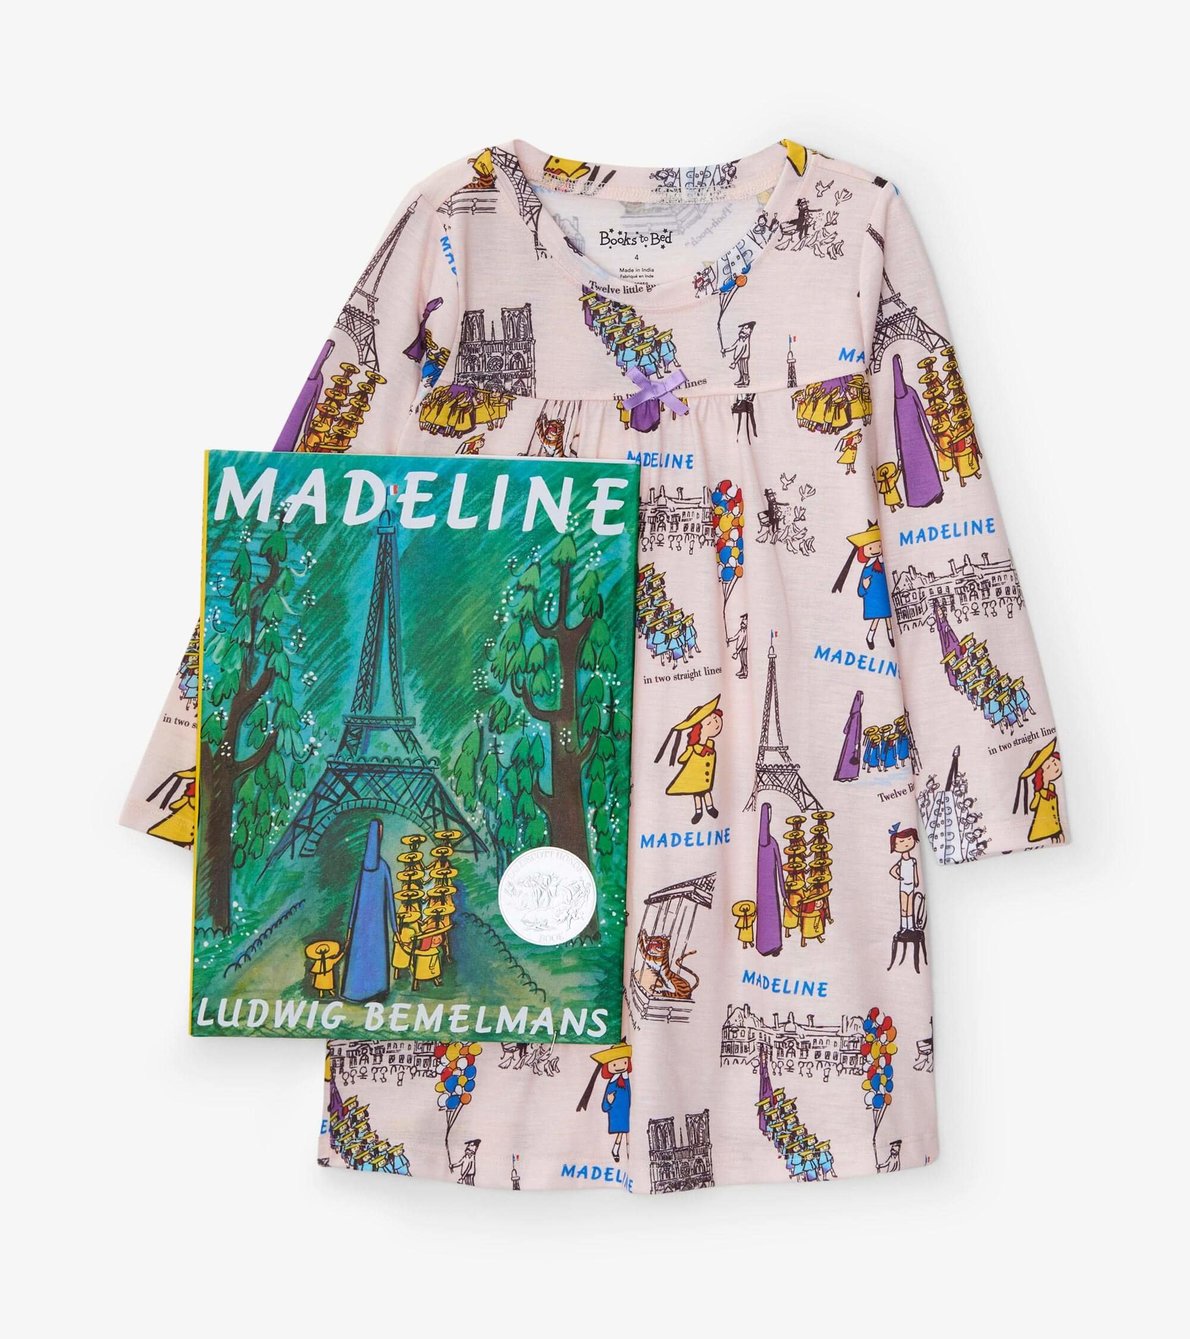 View larger image of Madeline Book and Nightdress Set